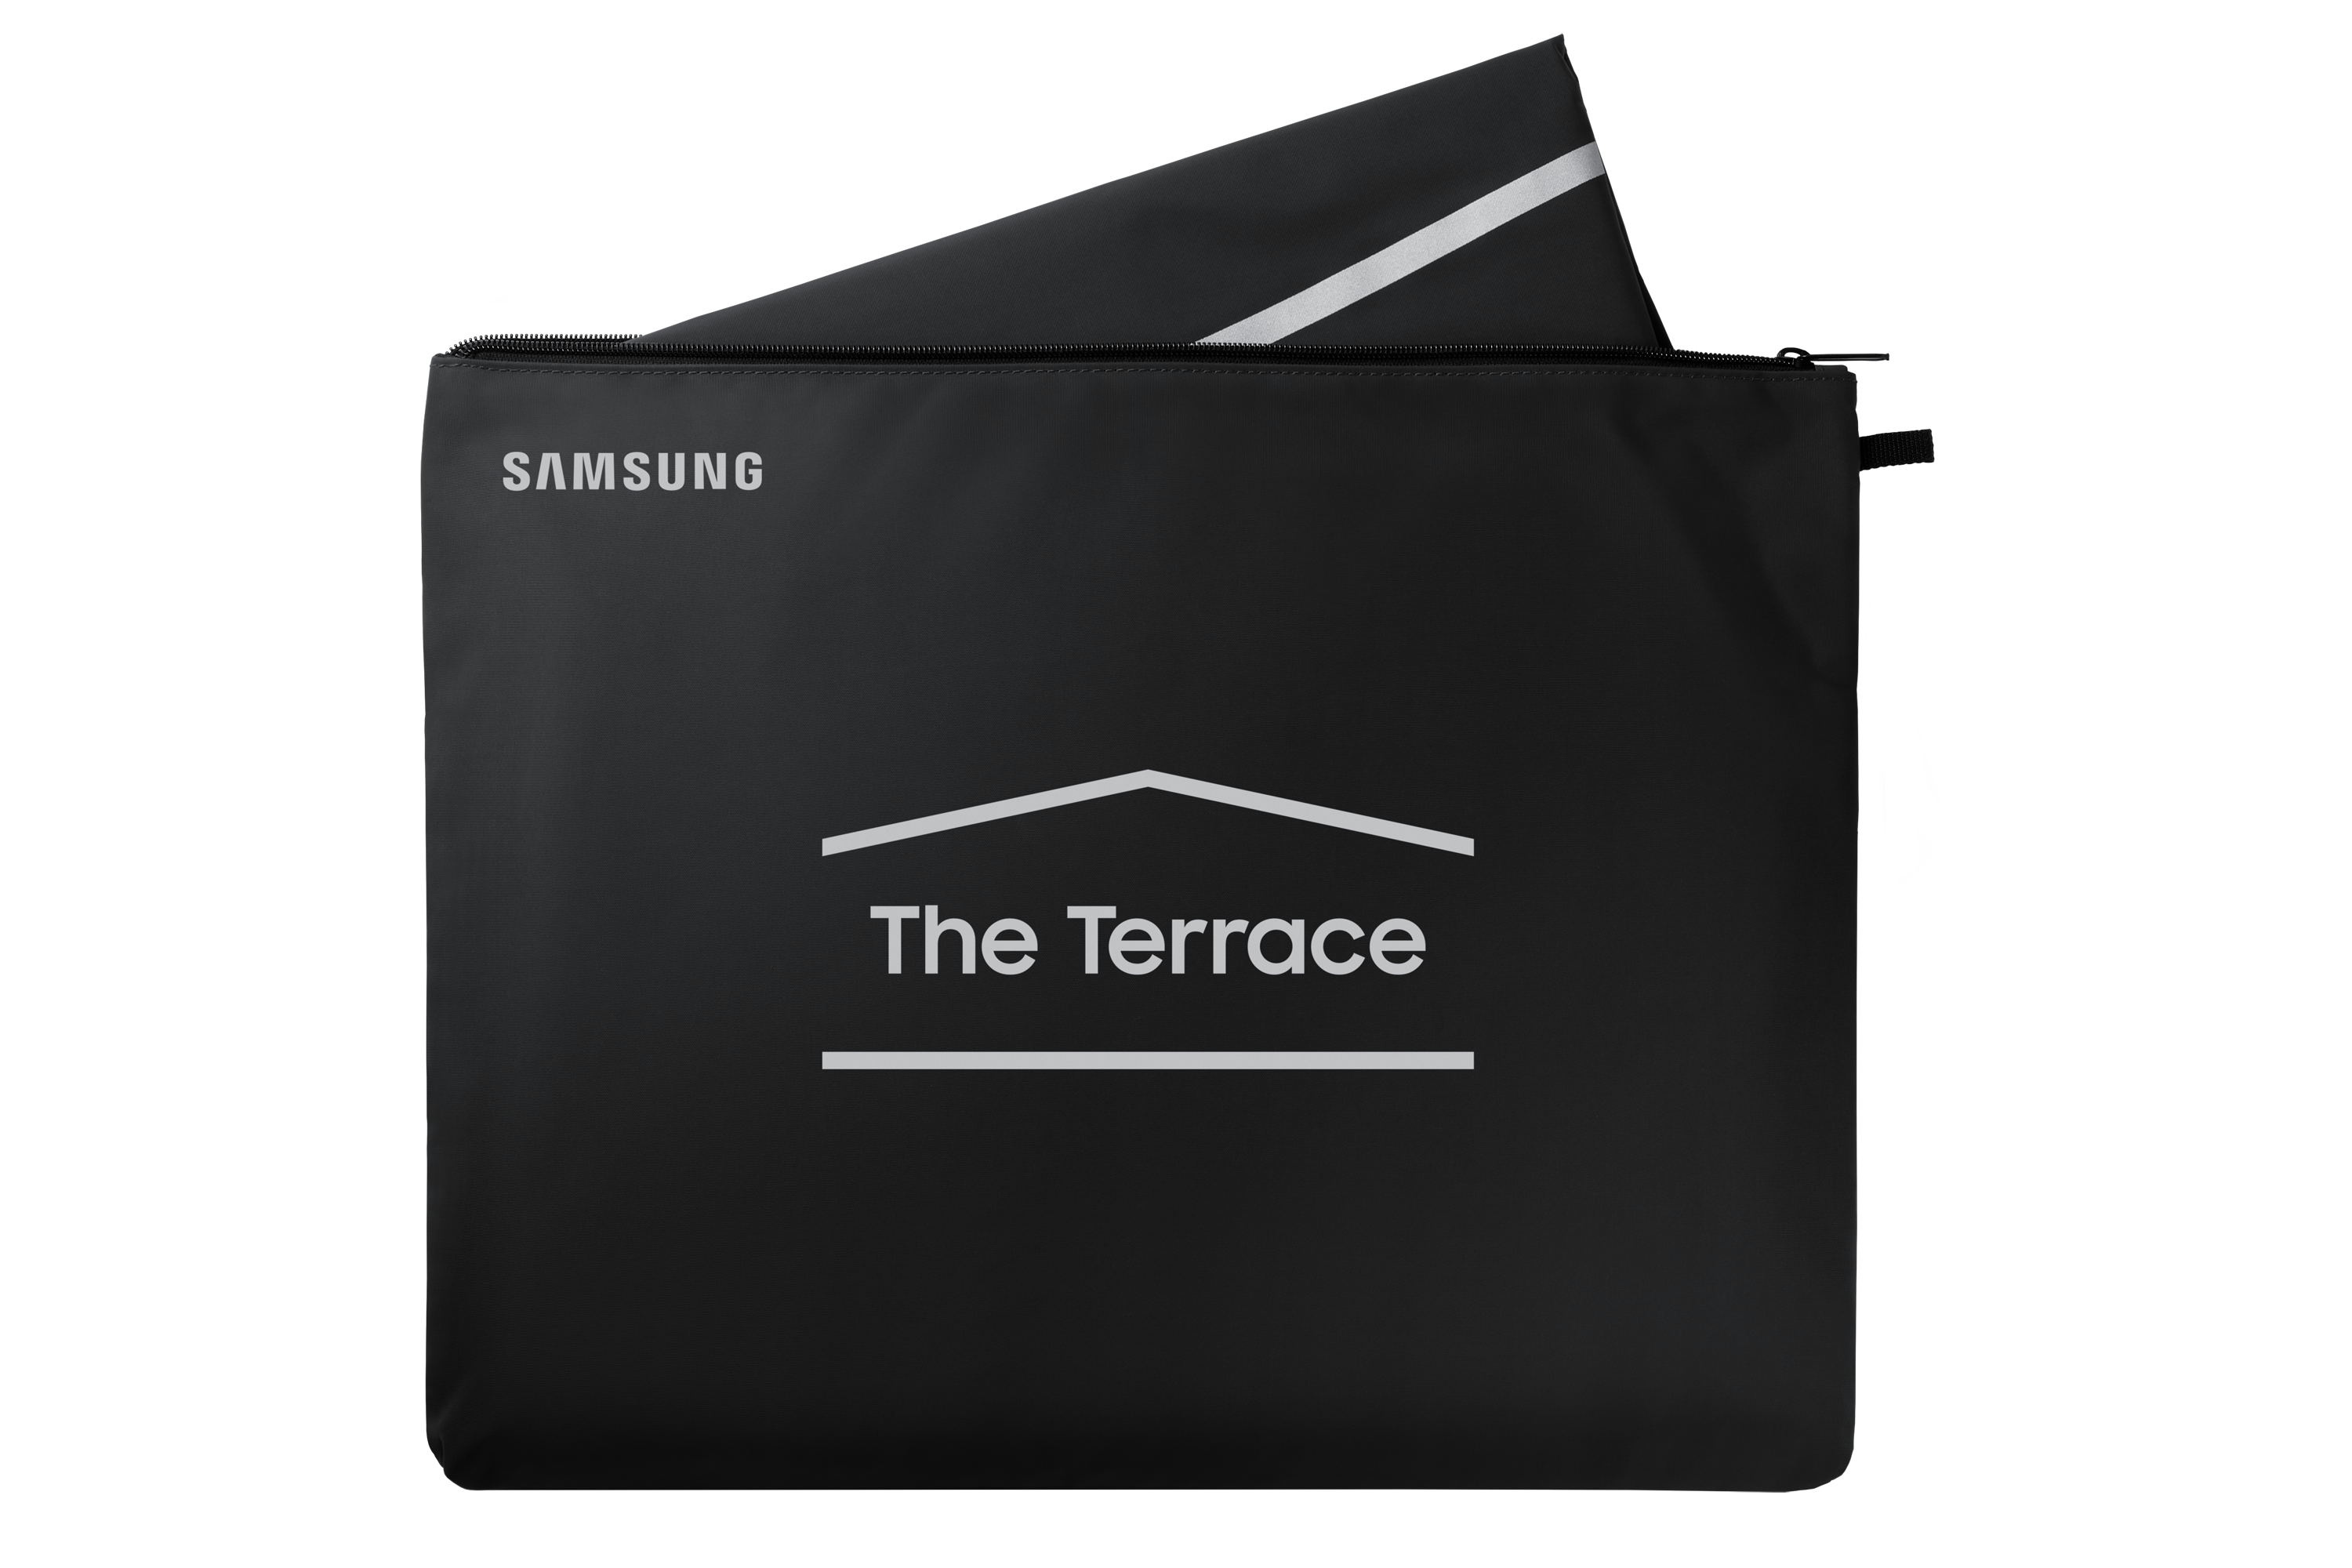 Samsung 55" The Terrace Outdoor TV Dust Cover VG-SDCC55G/ZA